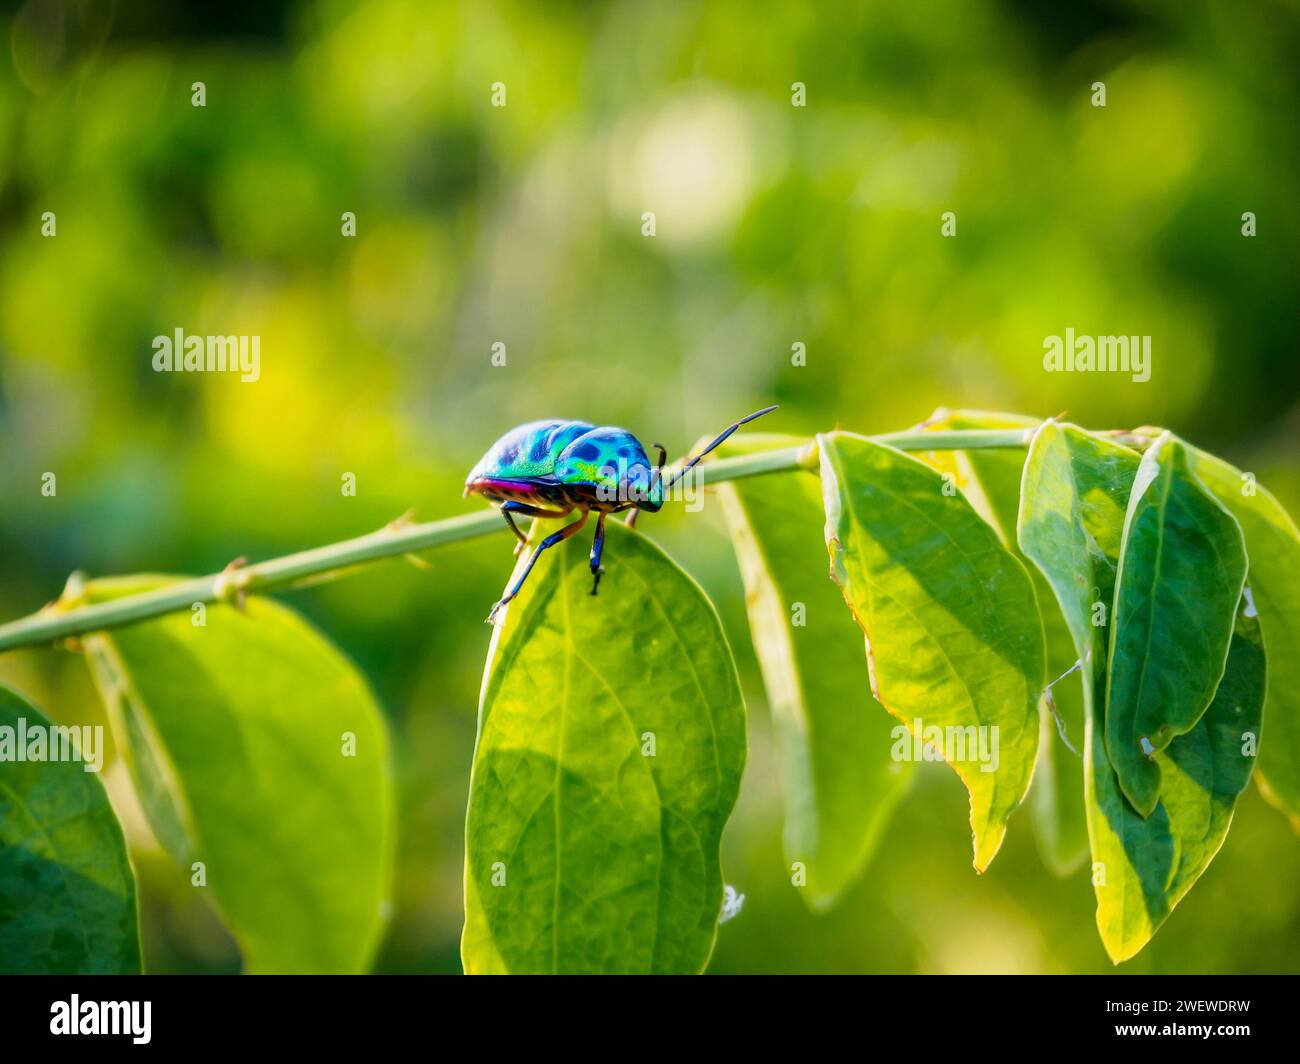 Jewel Bug in the nature Stock Photo